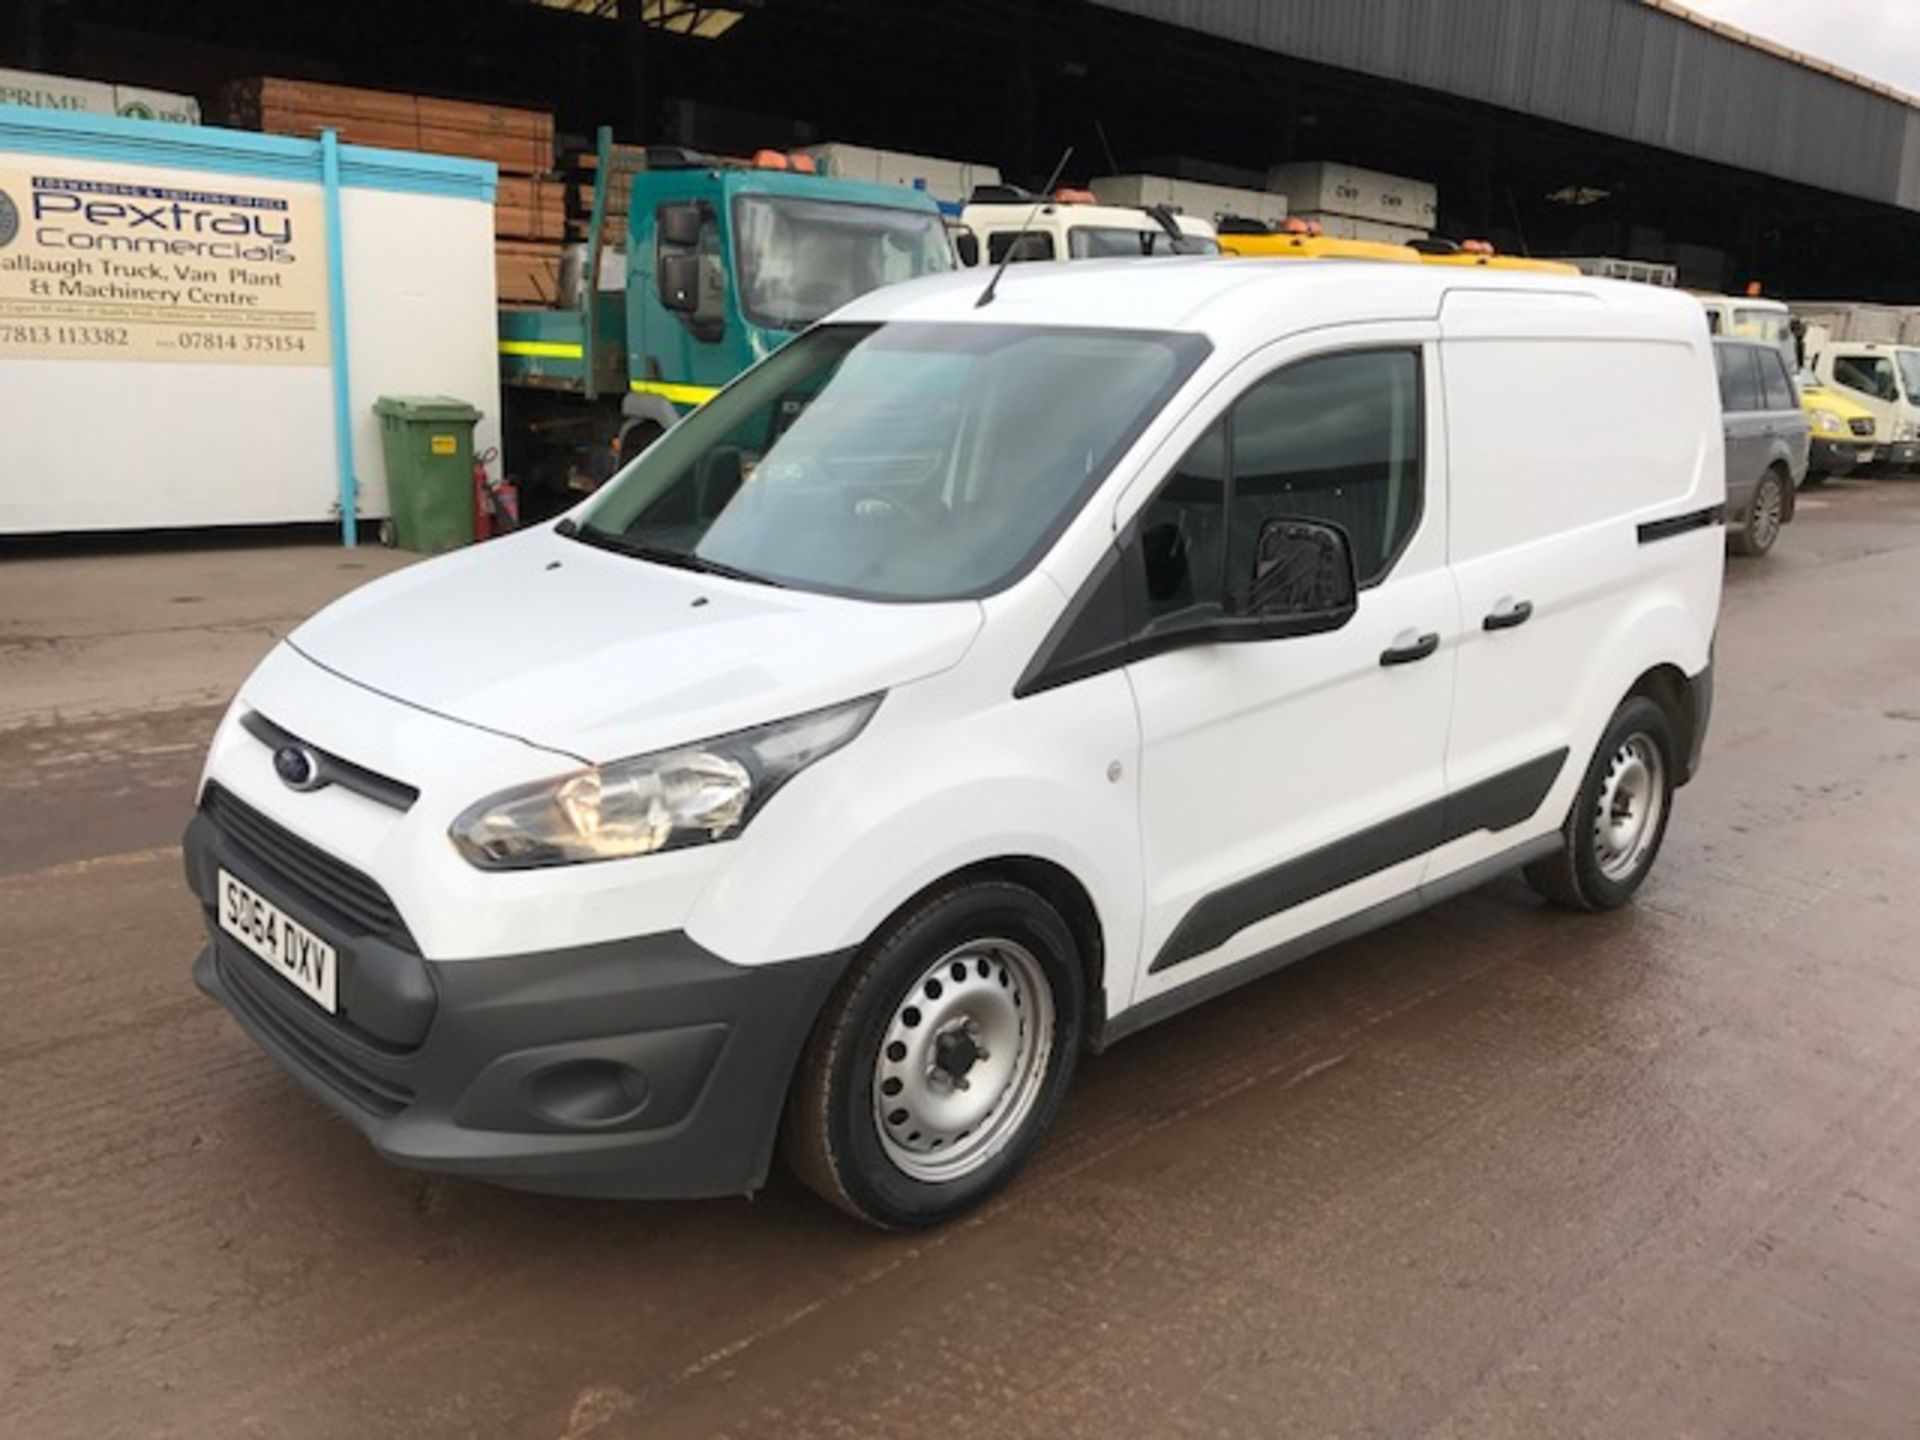 2014 Ford Transit Connect 200 van - Image 2 of 3